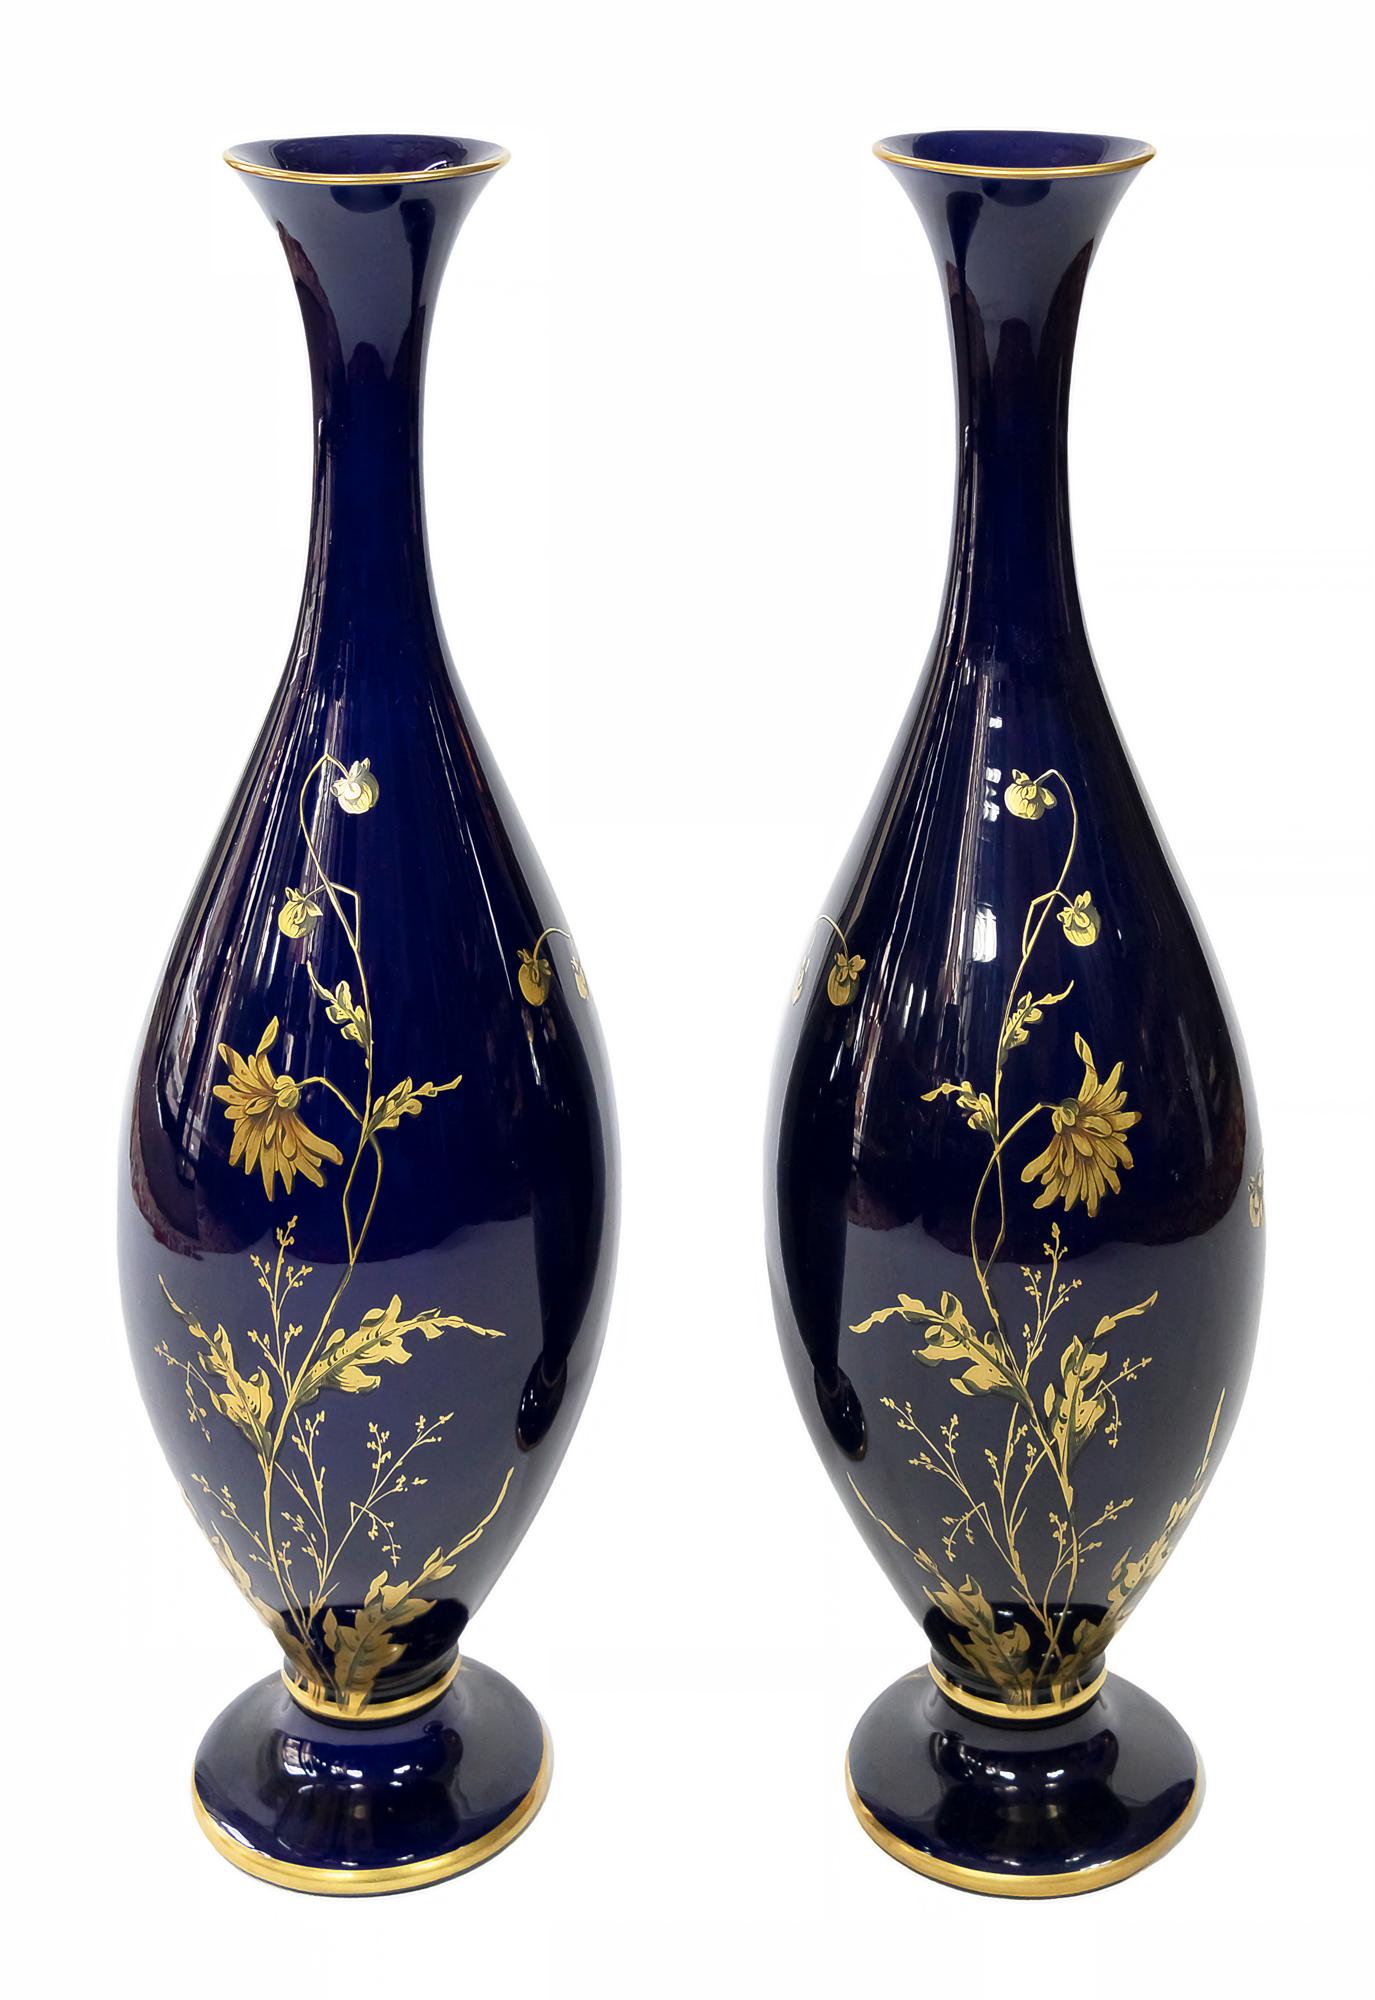 Pair of French glazed porcelain cobalt blue vases decorated with floral decor in gold.
Probably created by Gustave Asch and made by Sainte Radegonde.